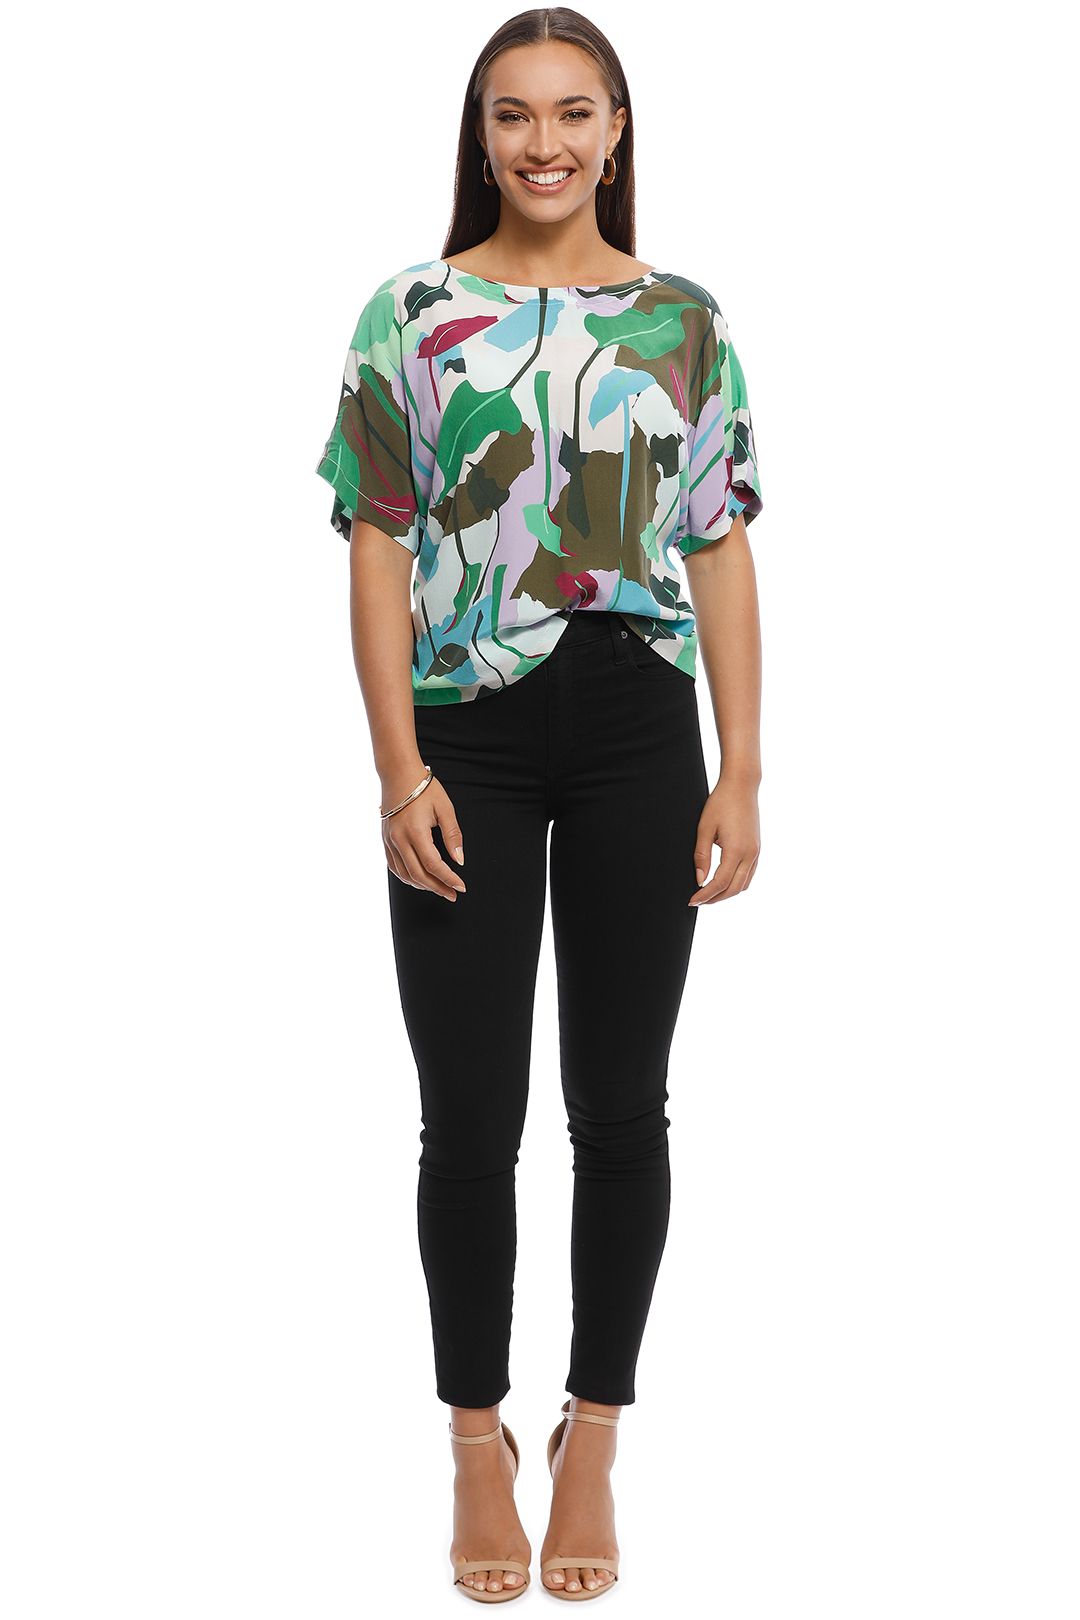 Gorman - Philodendron Silk Top - Multi - front